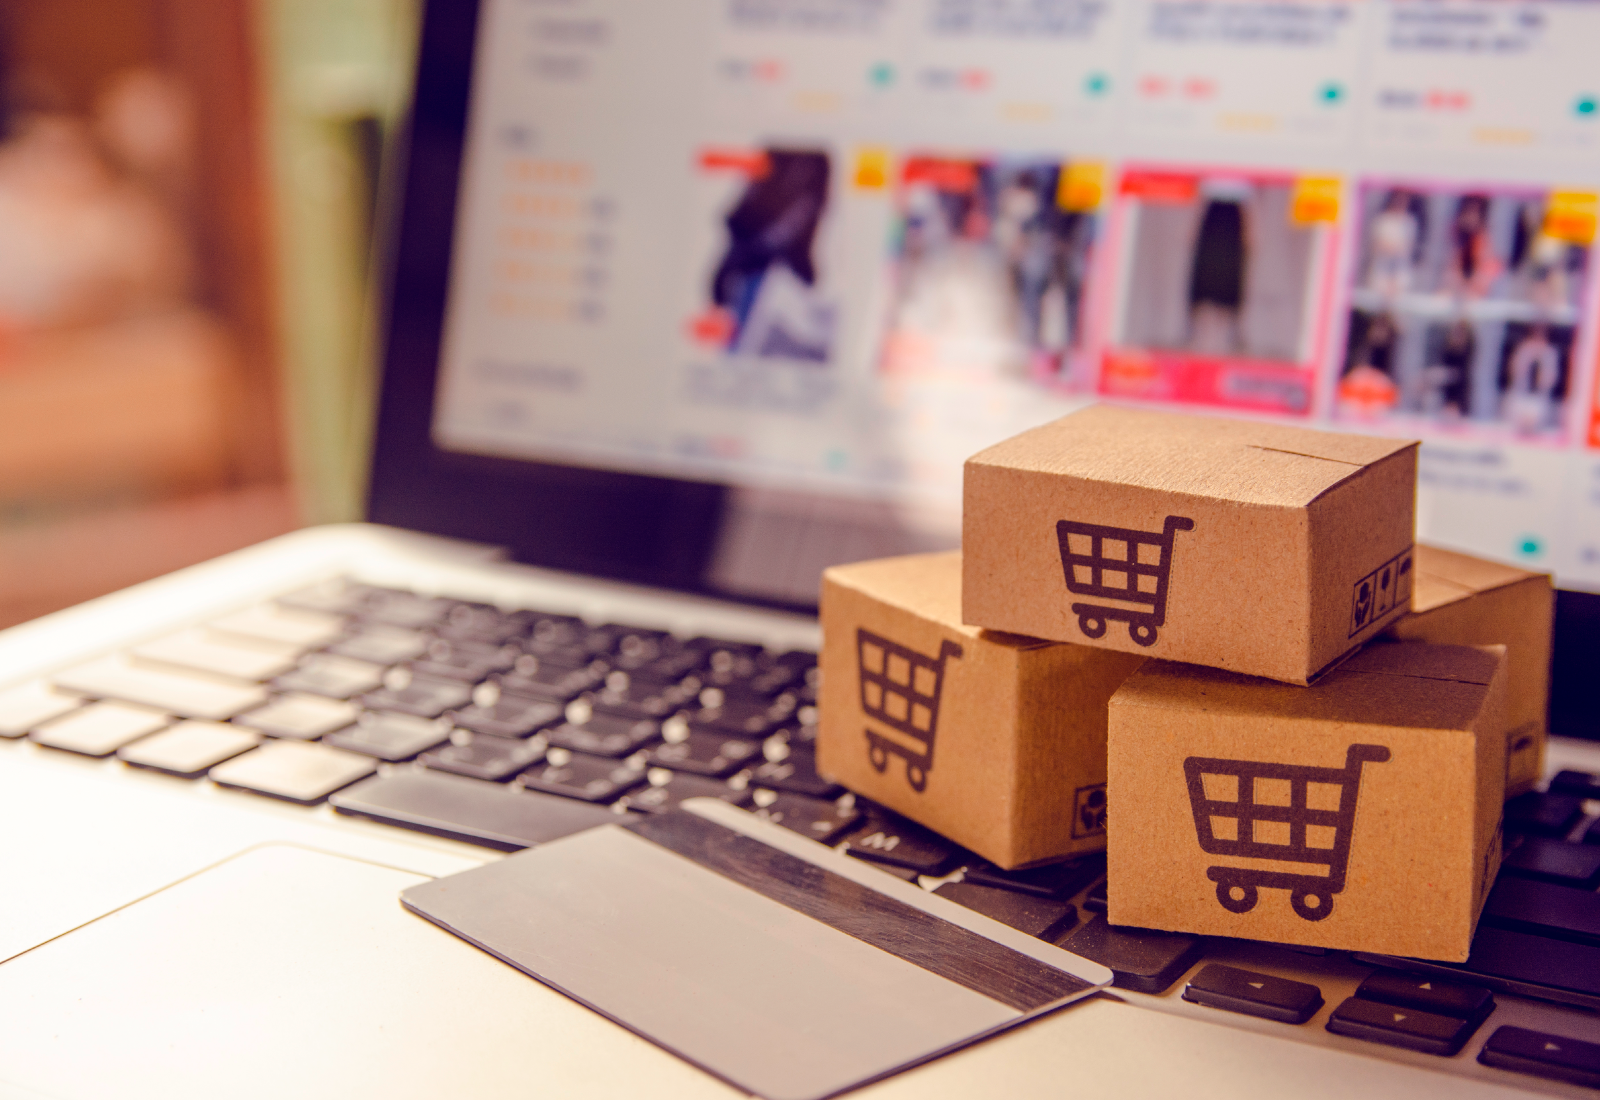 E-commerce in times of confinement